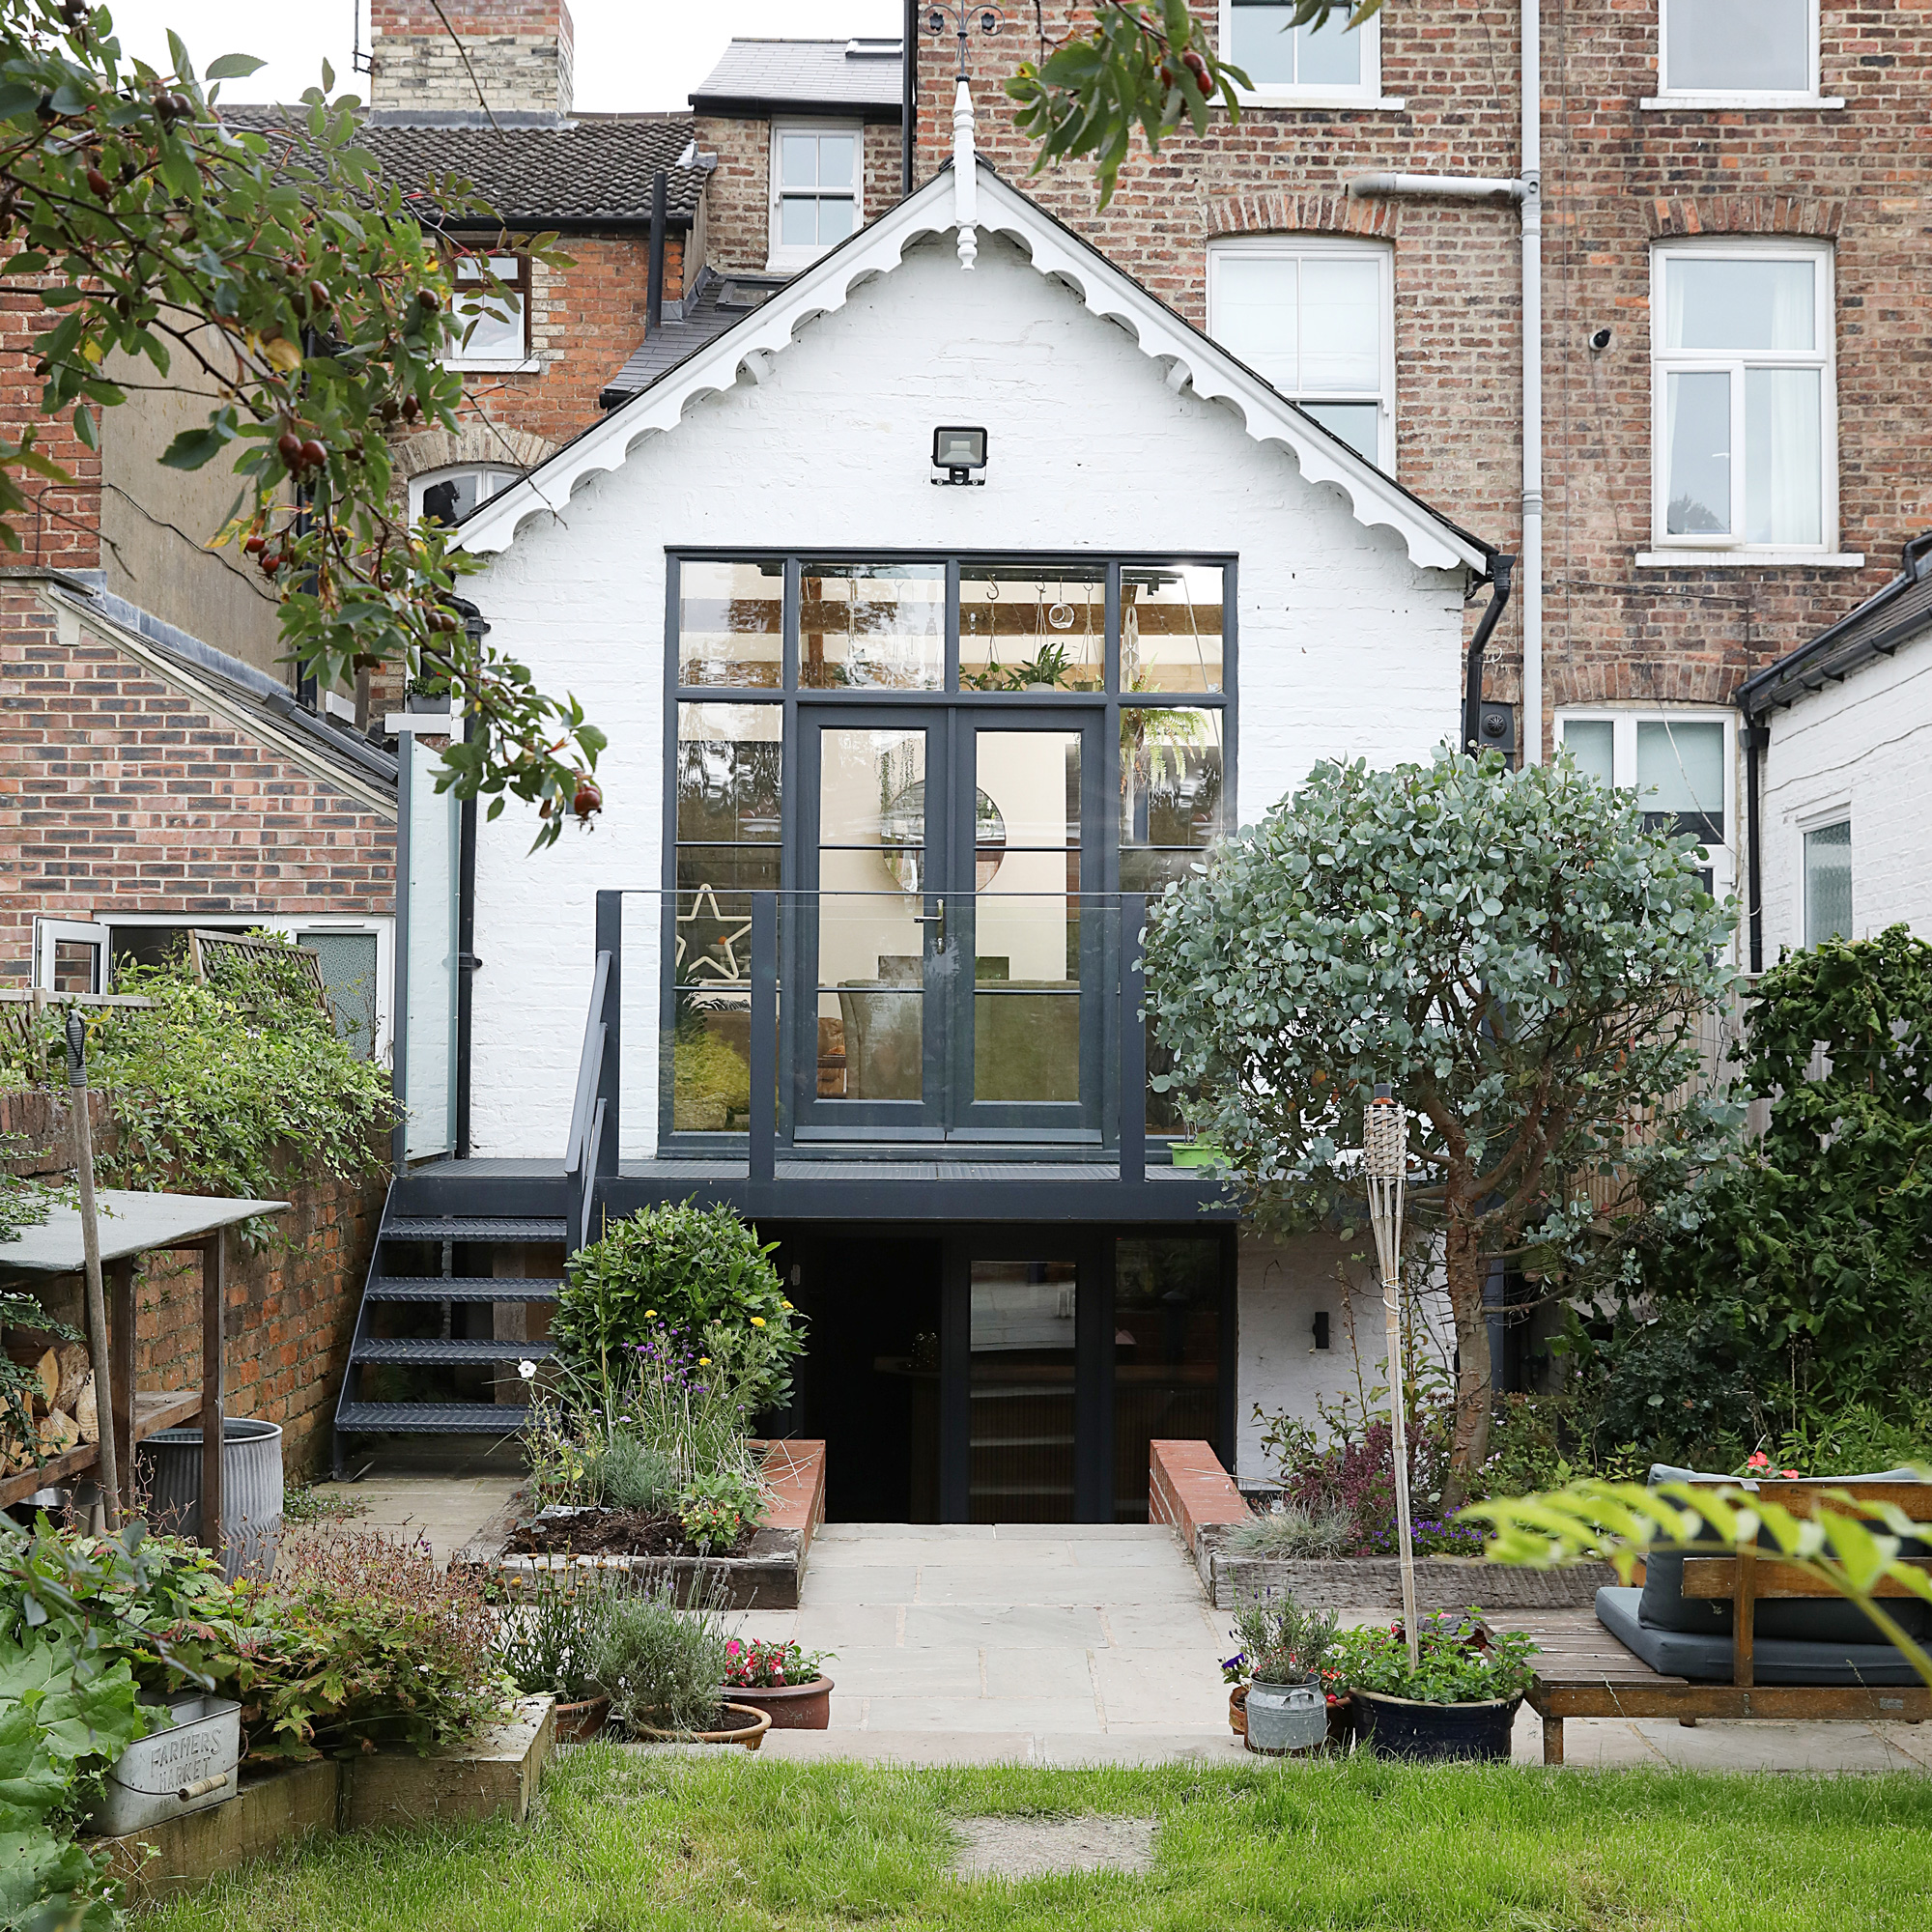 Victorian property revamp exterior showing ground floor and basement